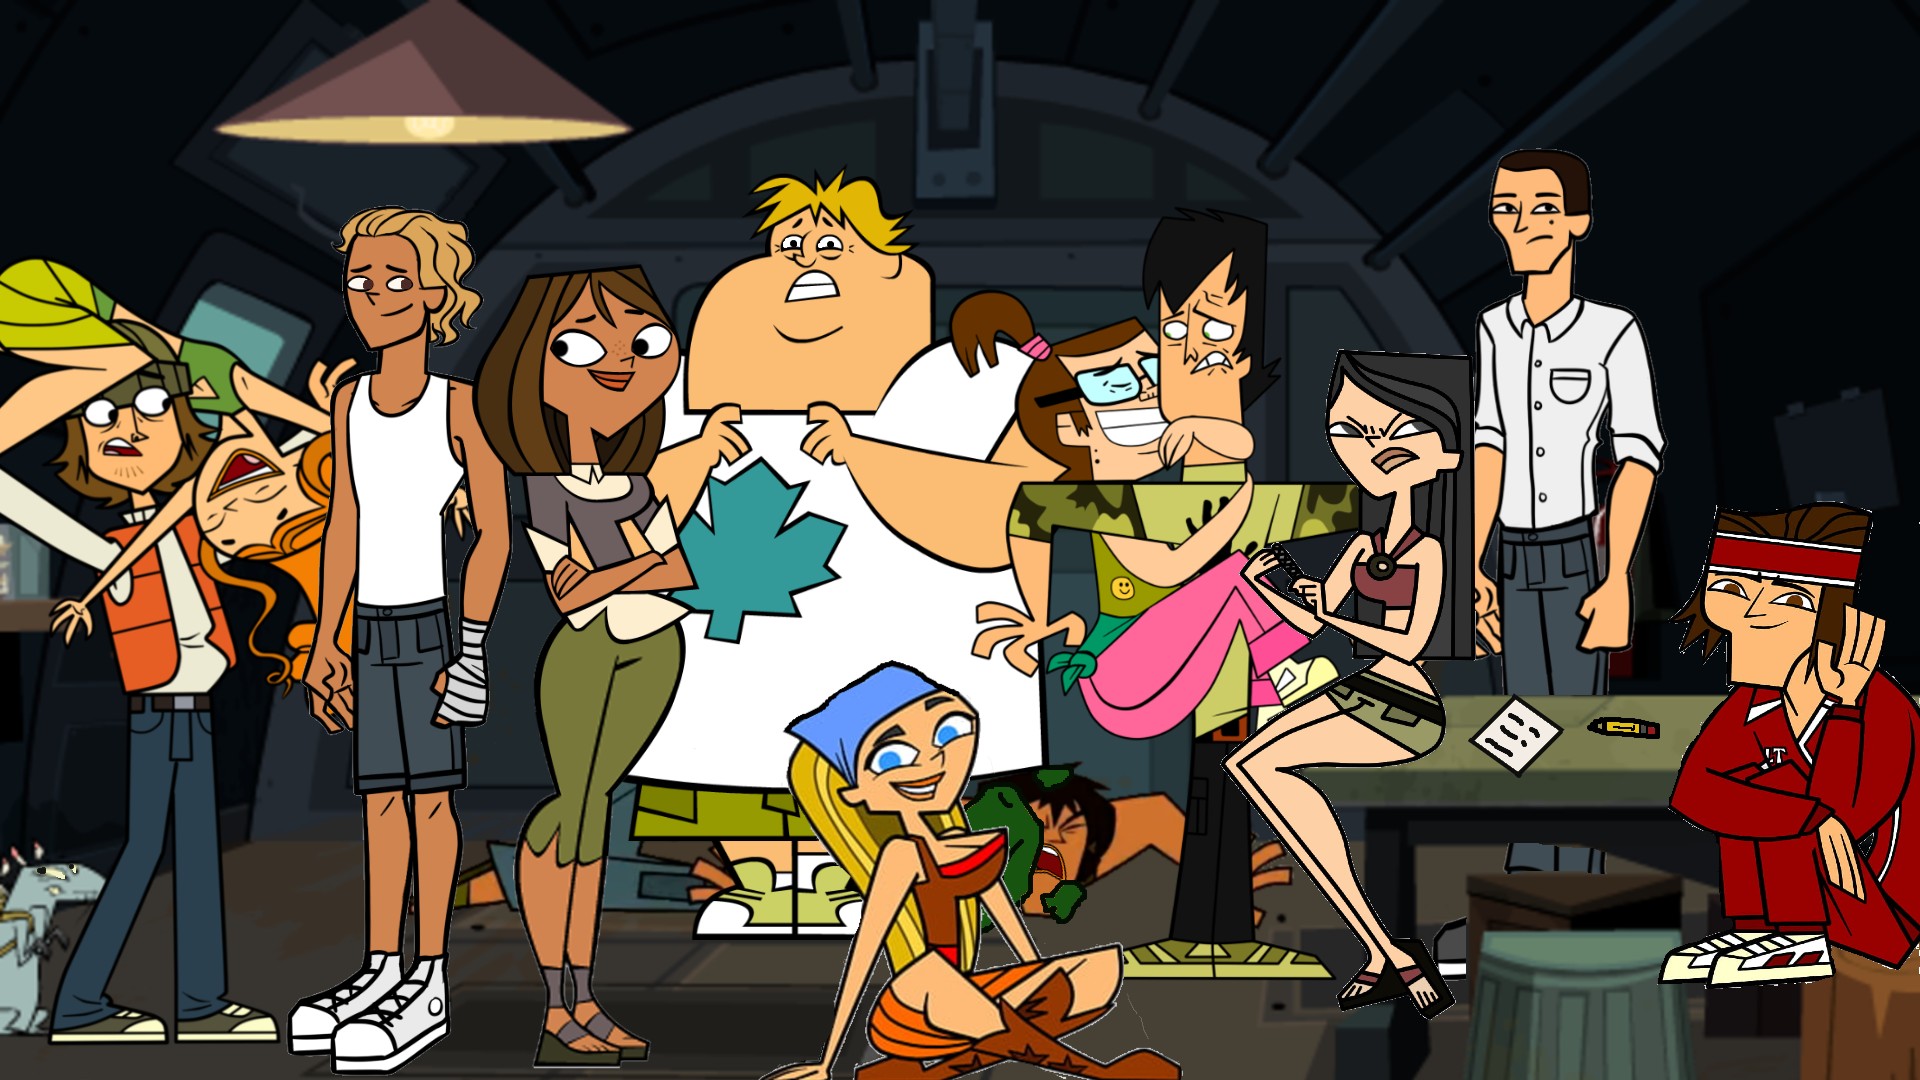 Total Drama Island Is One Of The Best Cartoons Ever And I Won't